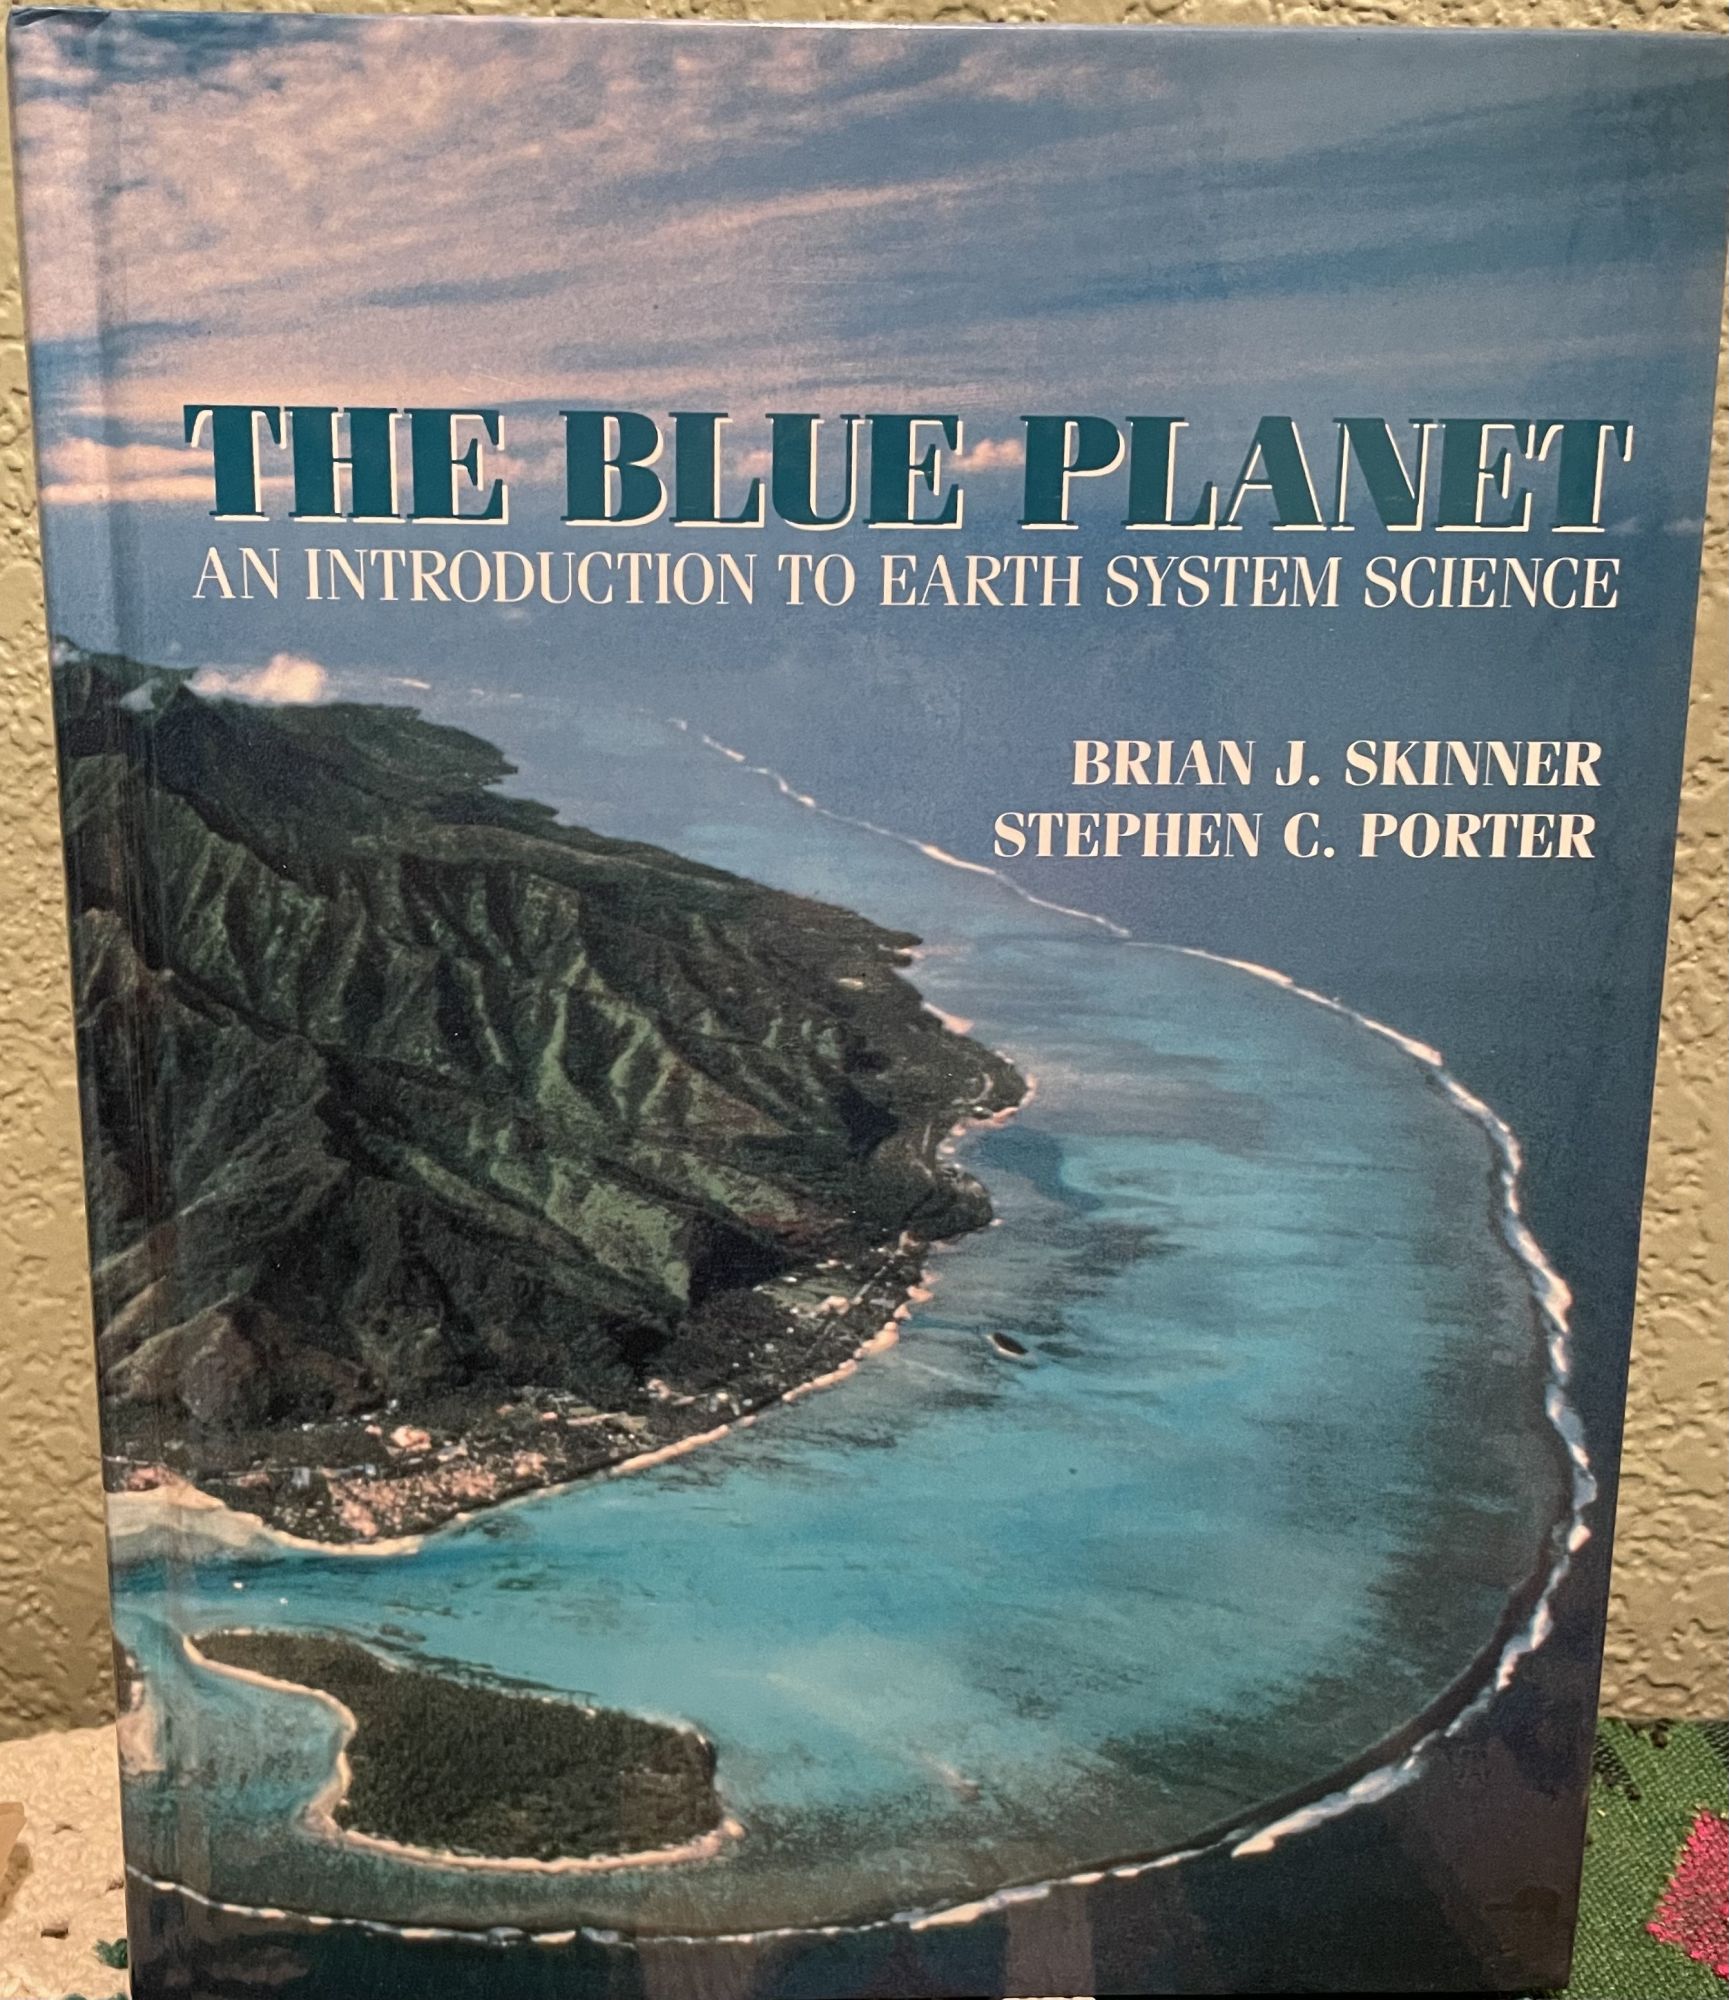 The Blue Planet An Introduction to Earth System Science. Brian J. Skinner, Stephen C. Porter.